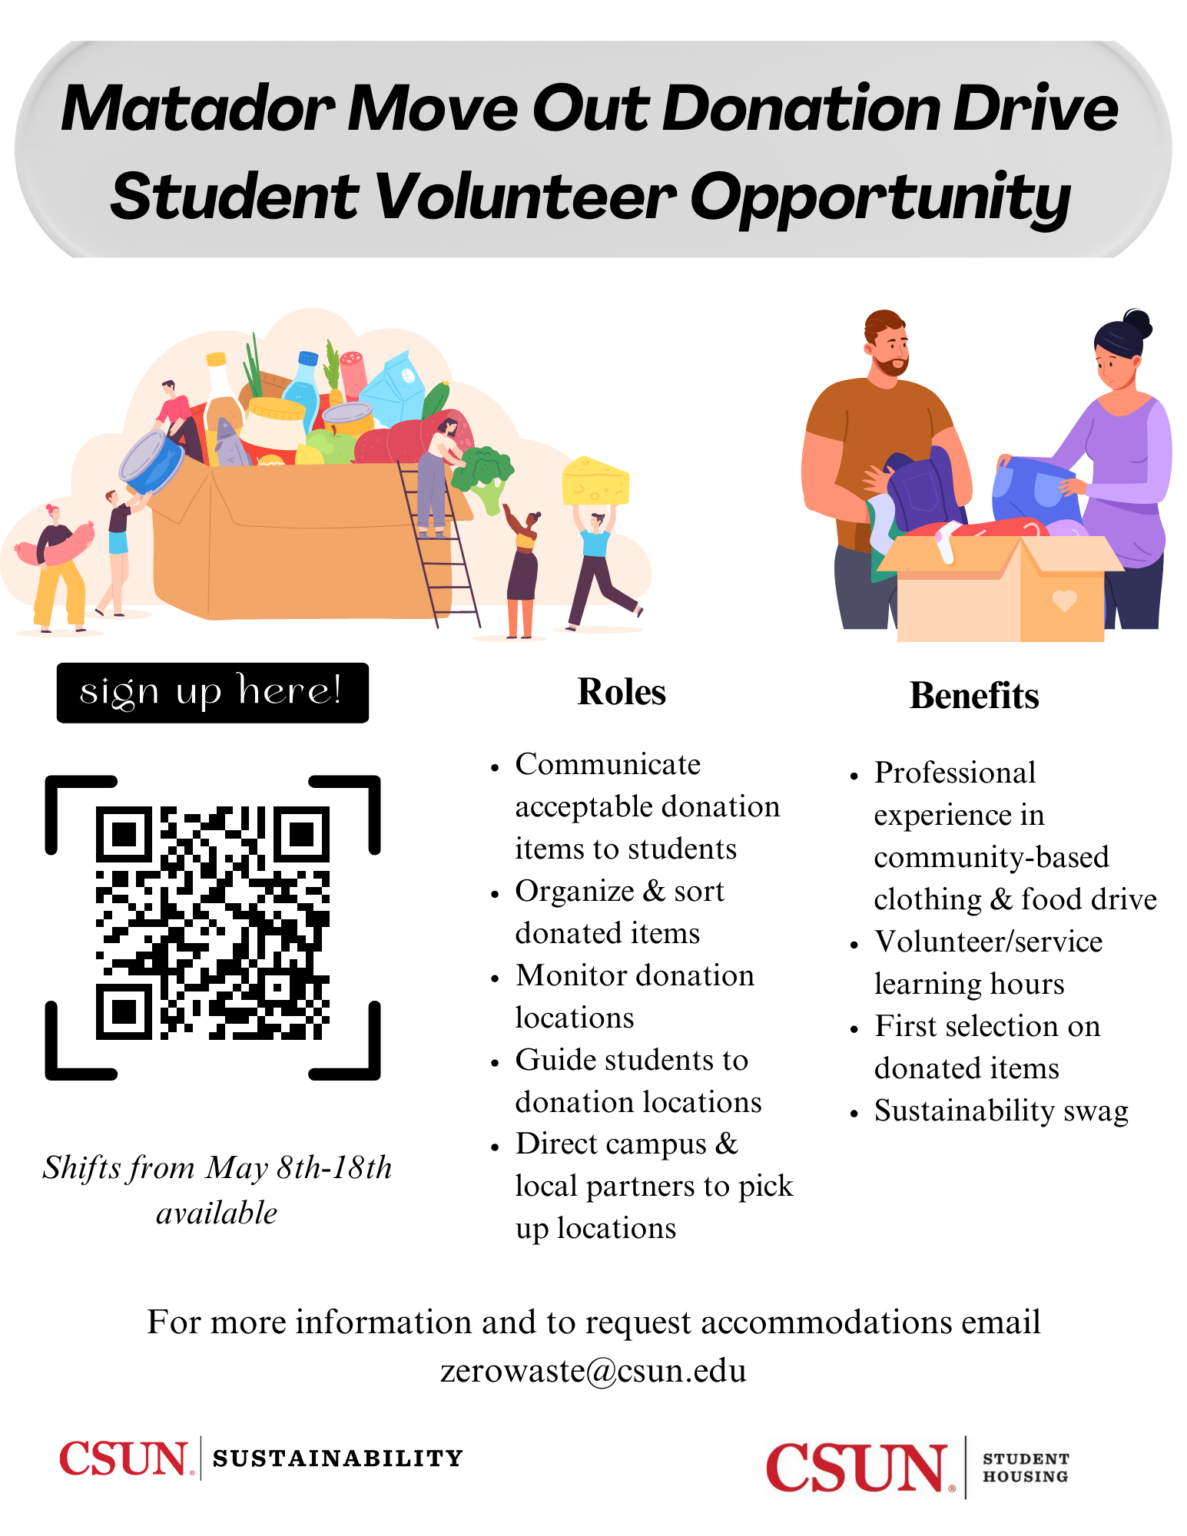 A flyer promoting the Matador Move Out Donation Drive, calling for student volunteers.